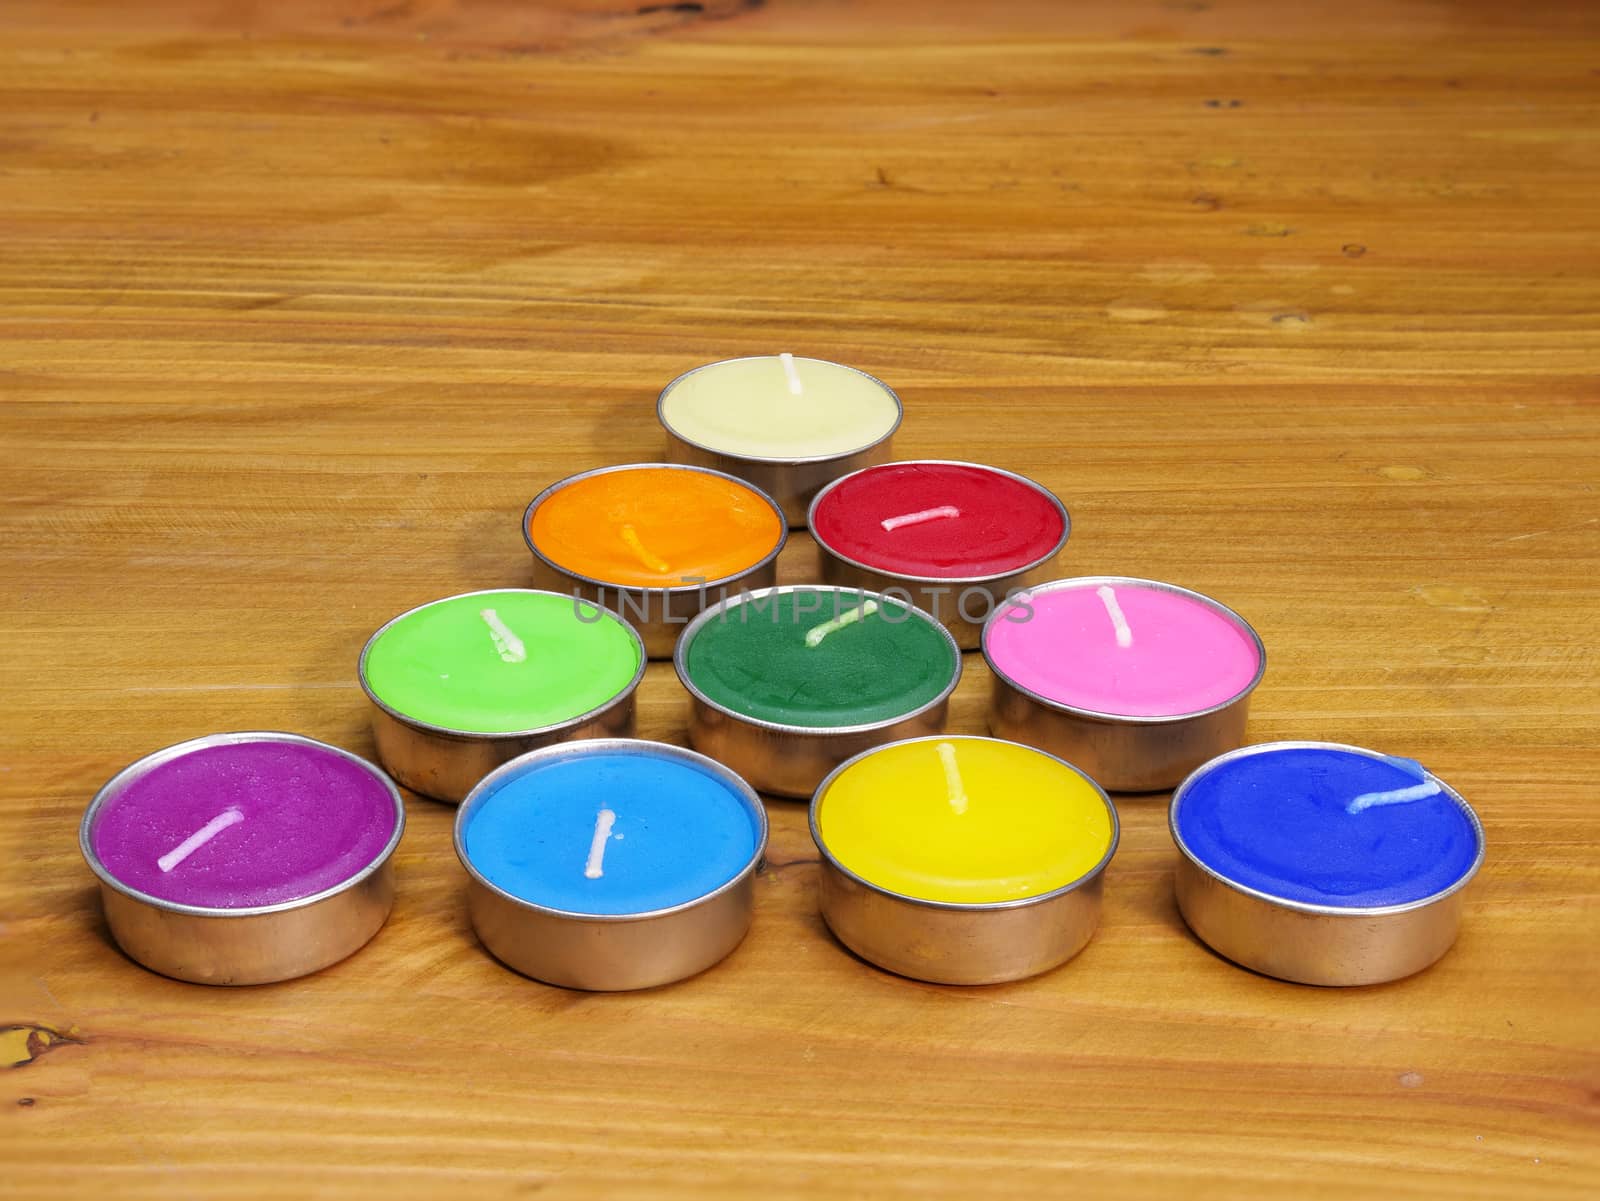 colorful fragrant wax candles arranged in triangular shape to resemble xmax tree, shown on natural wood background